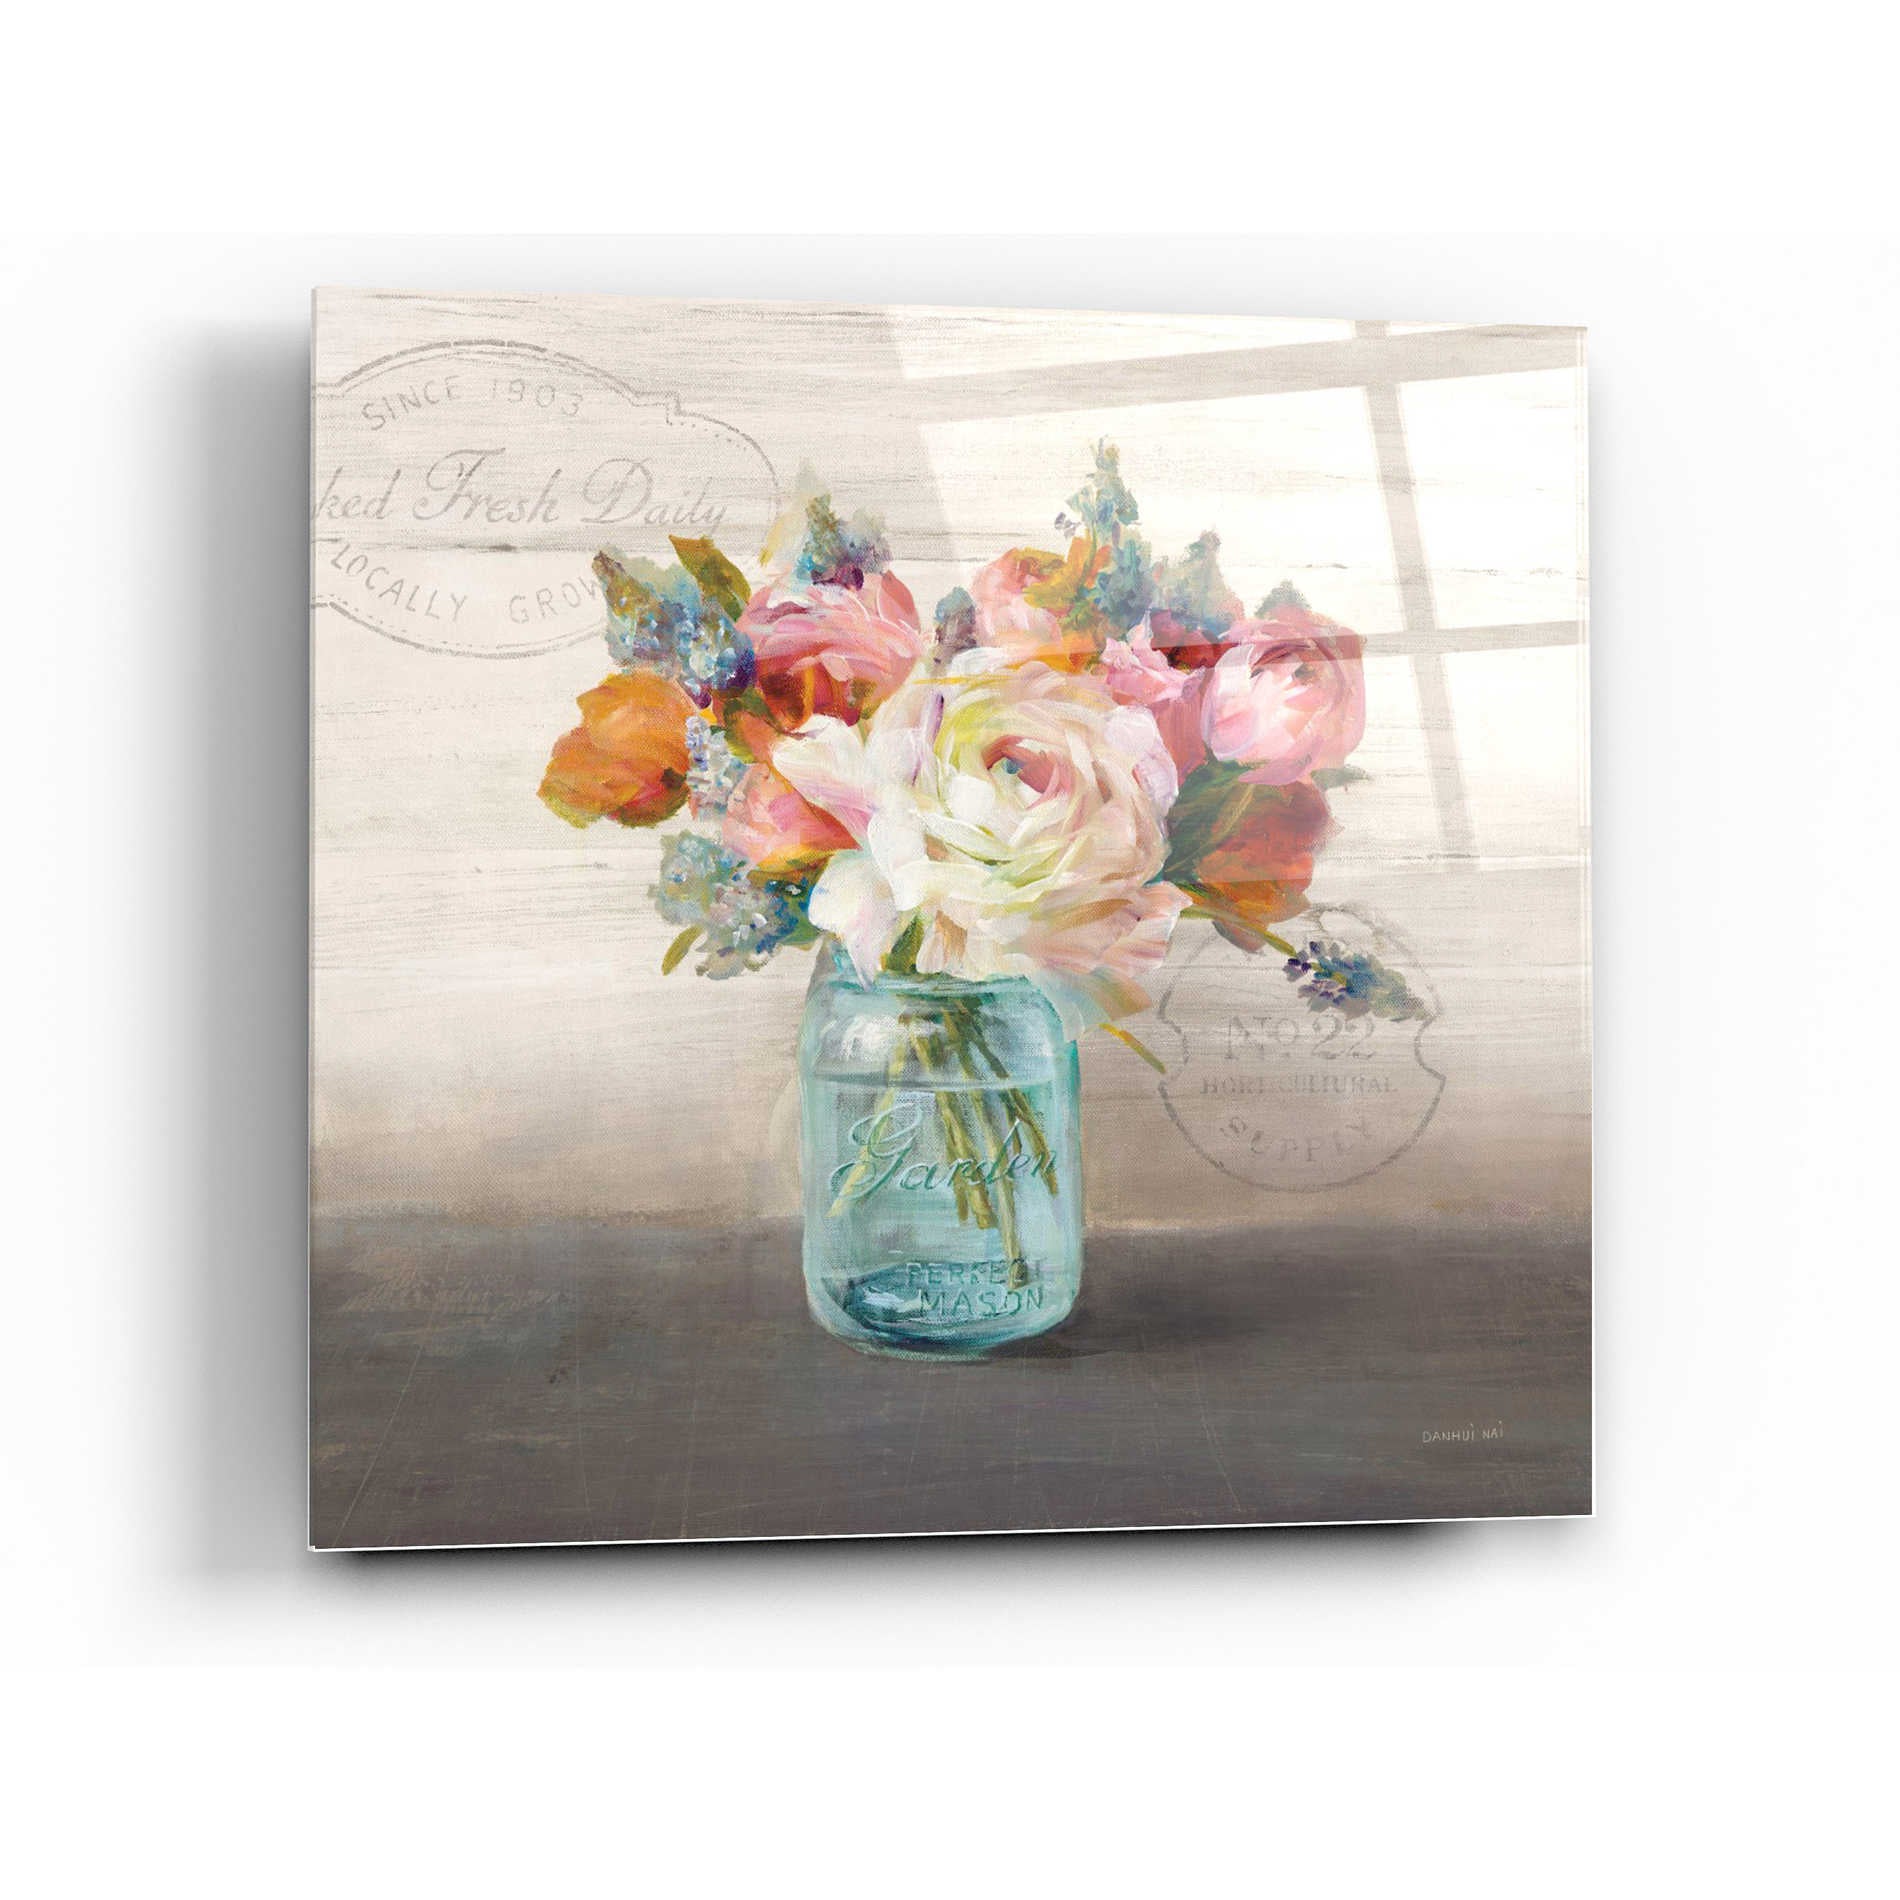 Epic Art 'French Cottage Bouquet II Mothers' by Danhui Nai, Acrylic Glass Wall Art,24x24